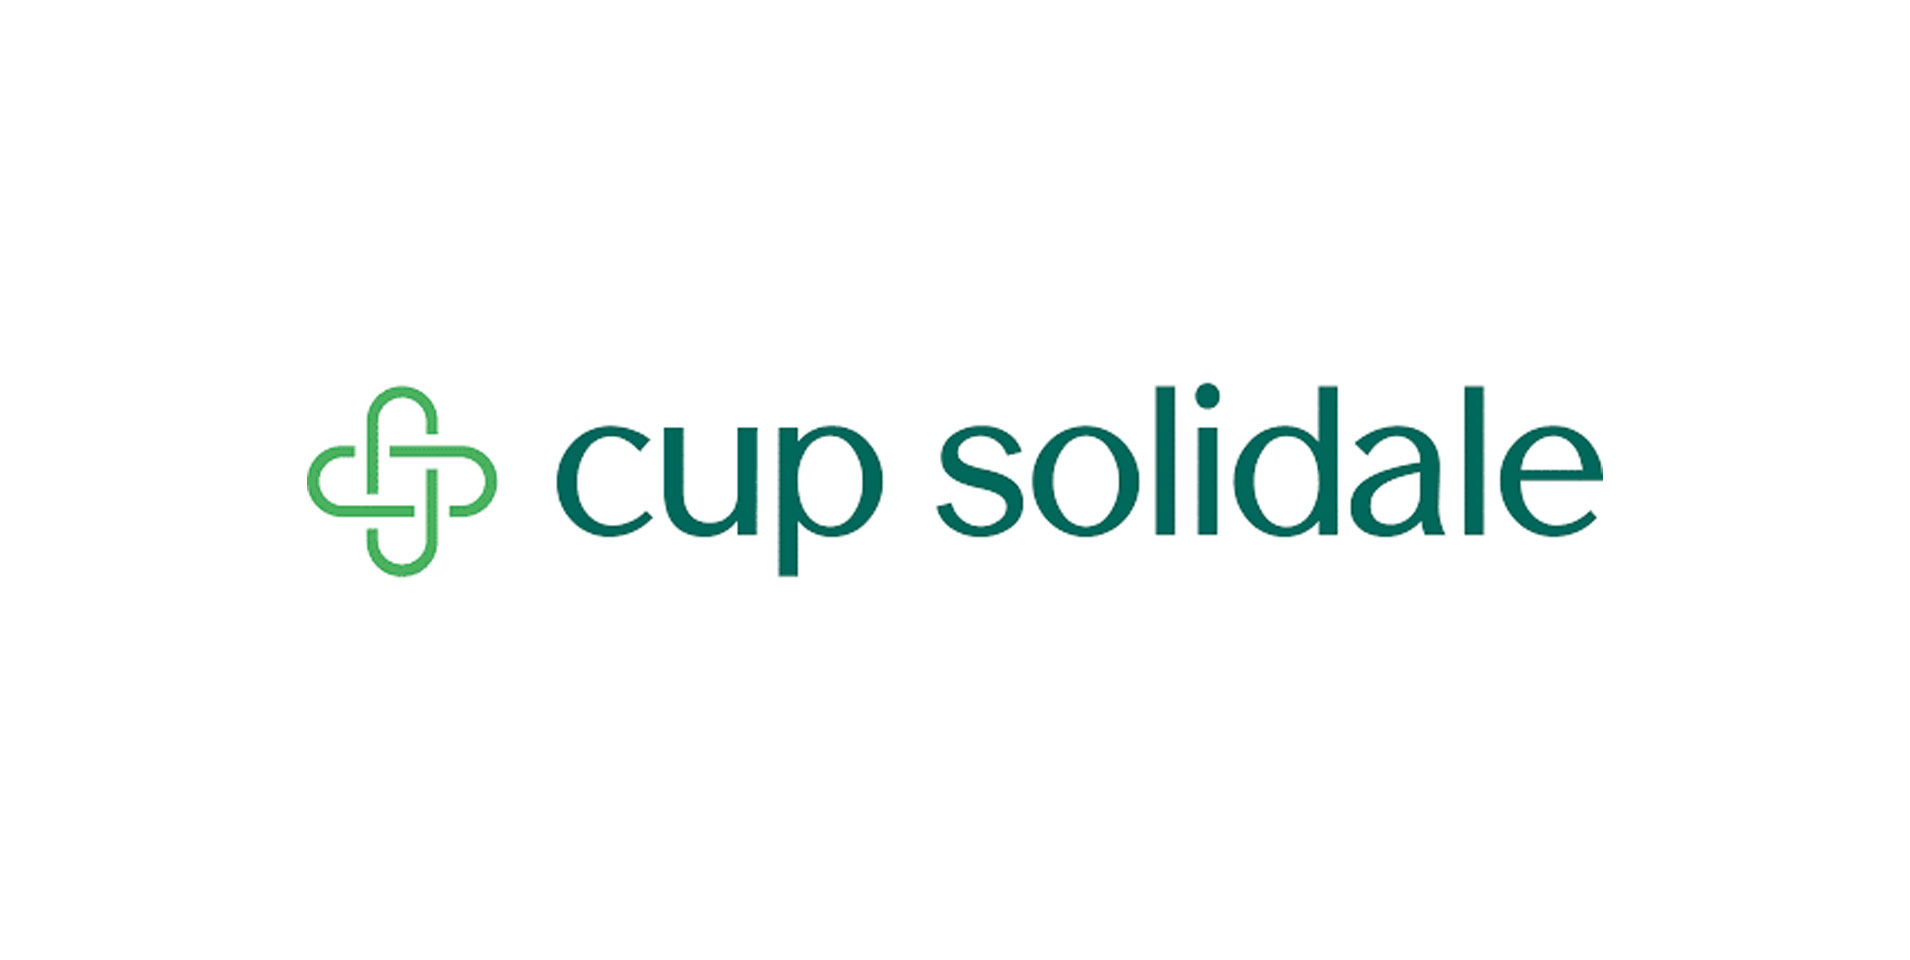 cup solidale